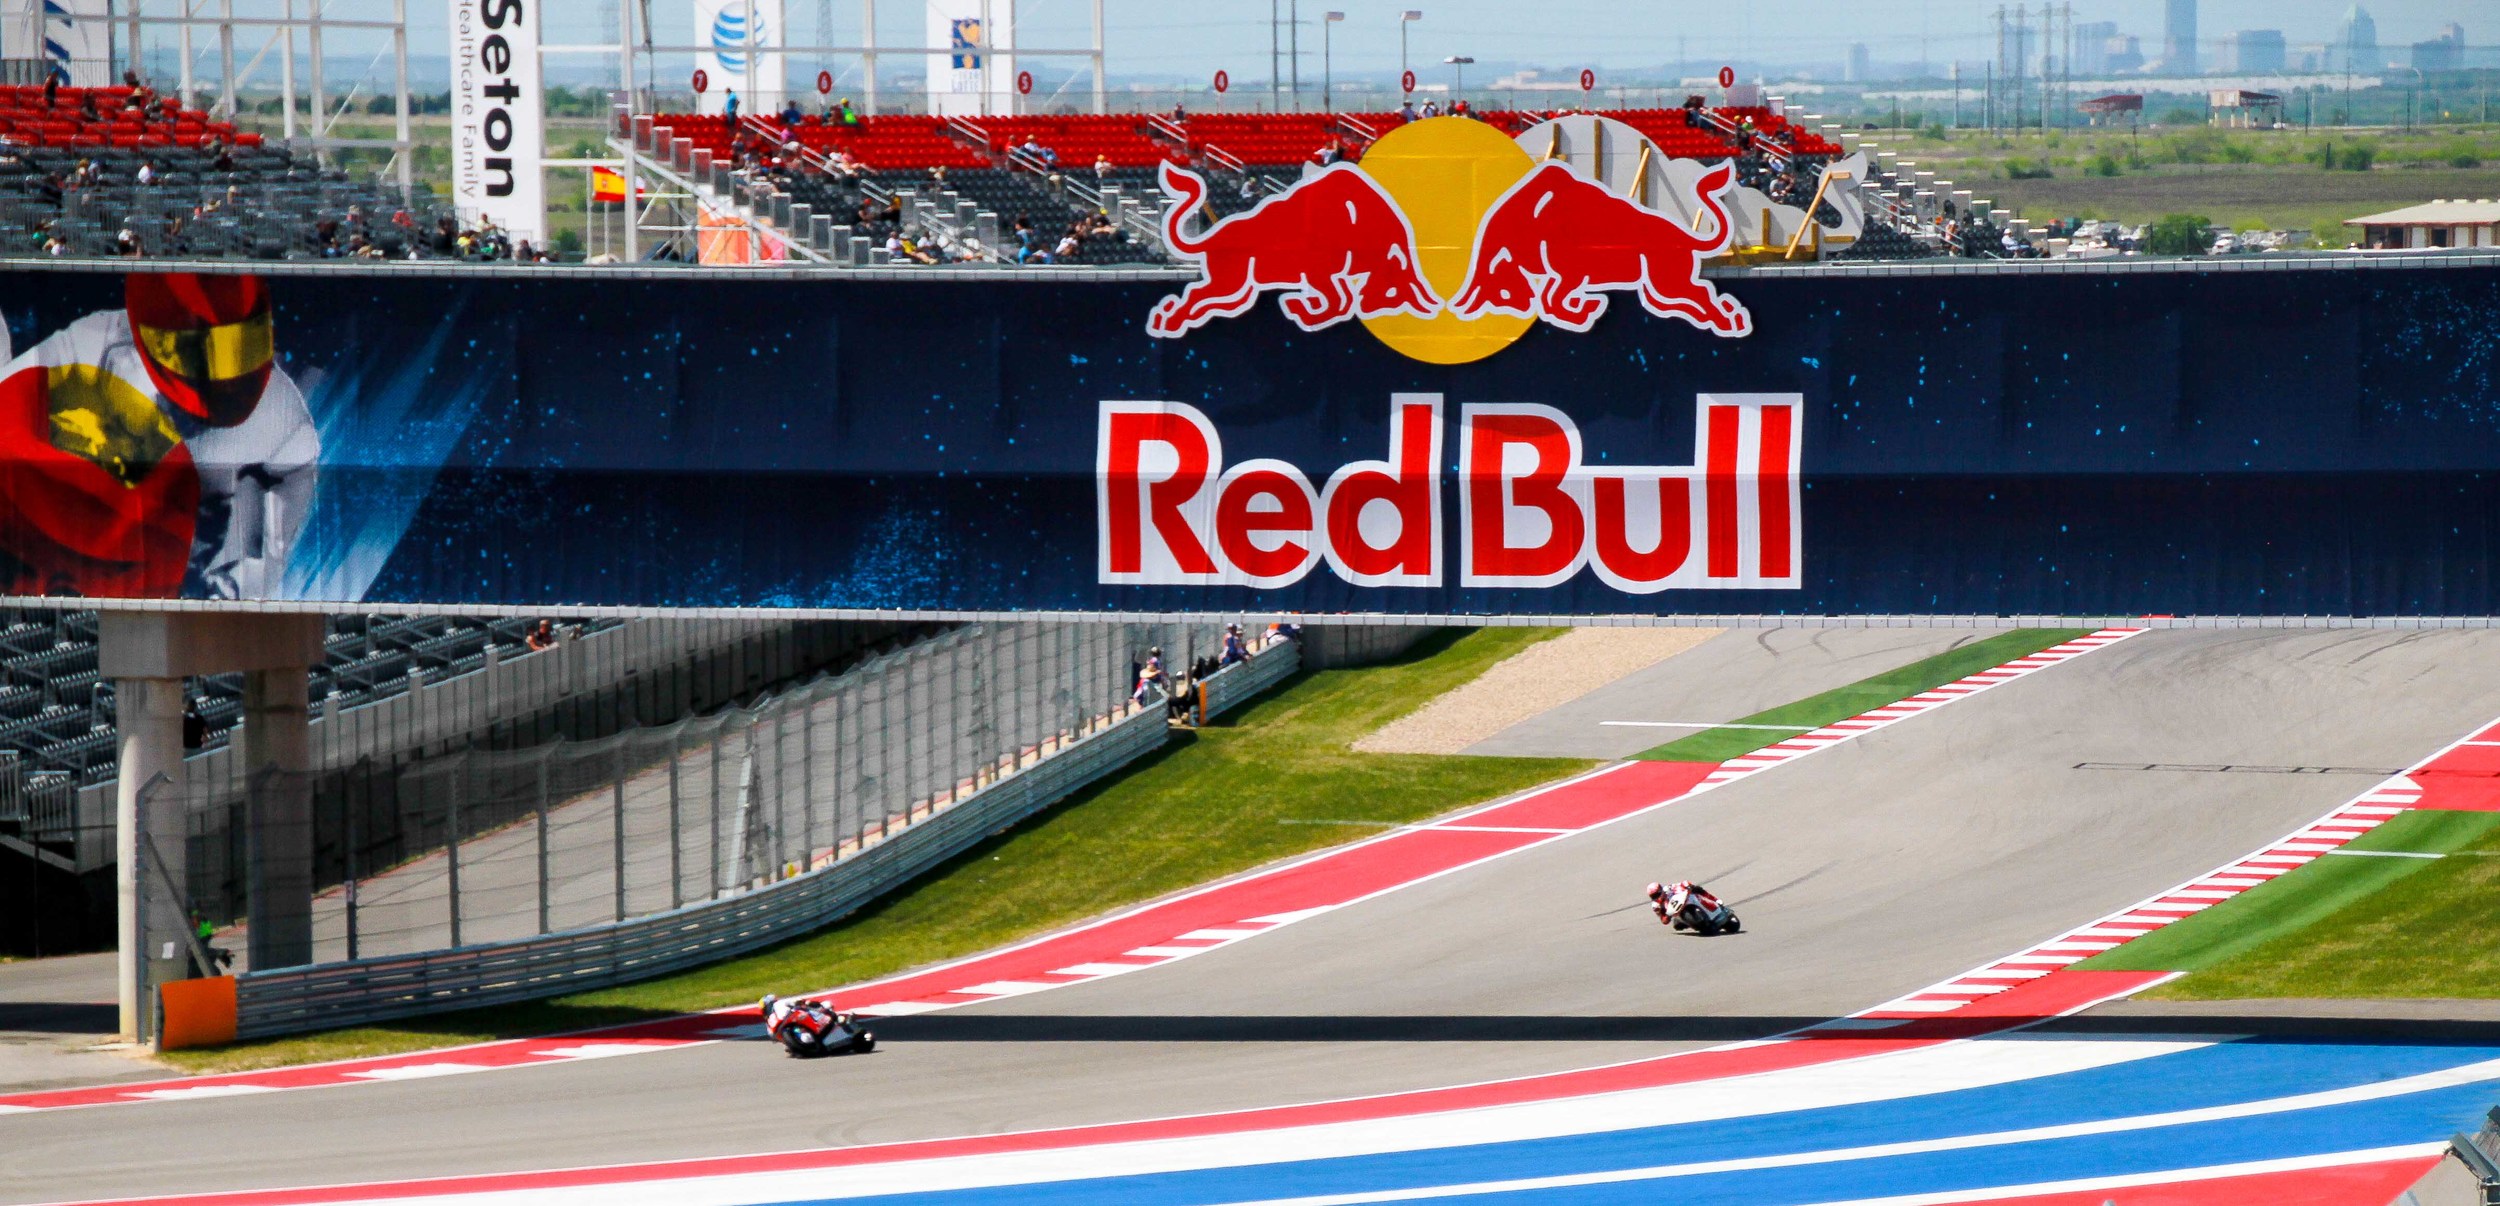  Moto2 Riders passing under the pedestrian bridge by Turn 16 at the Circuit of the Americas. 